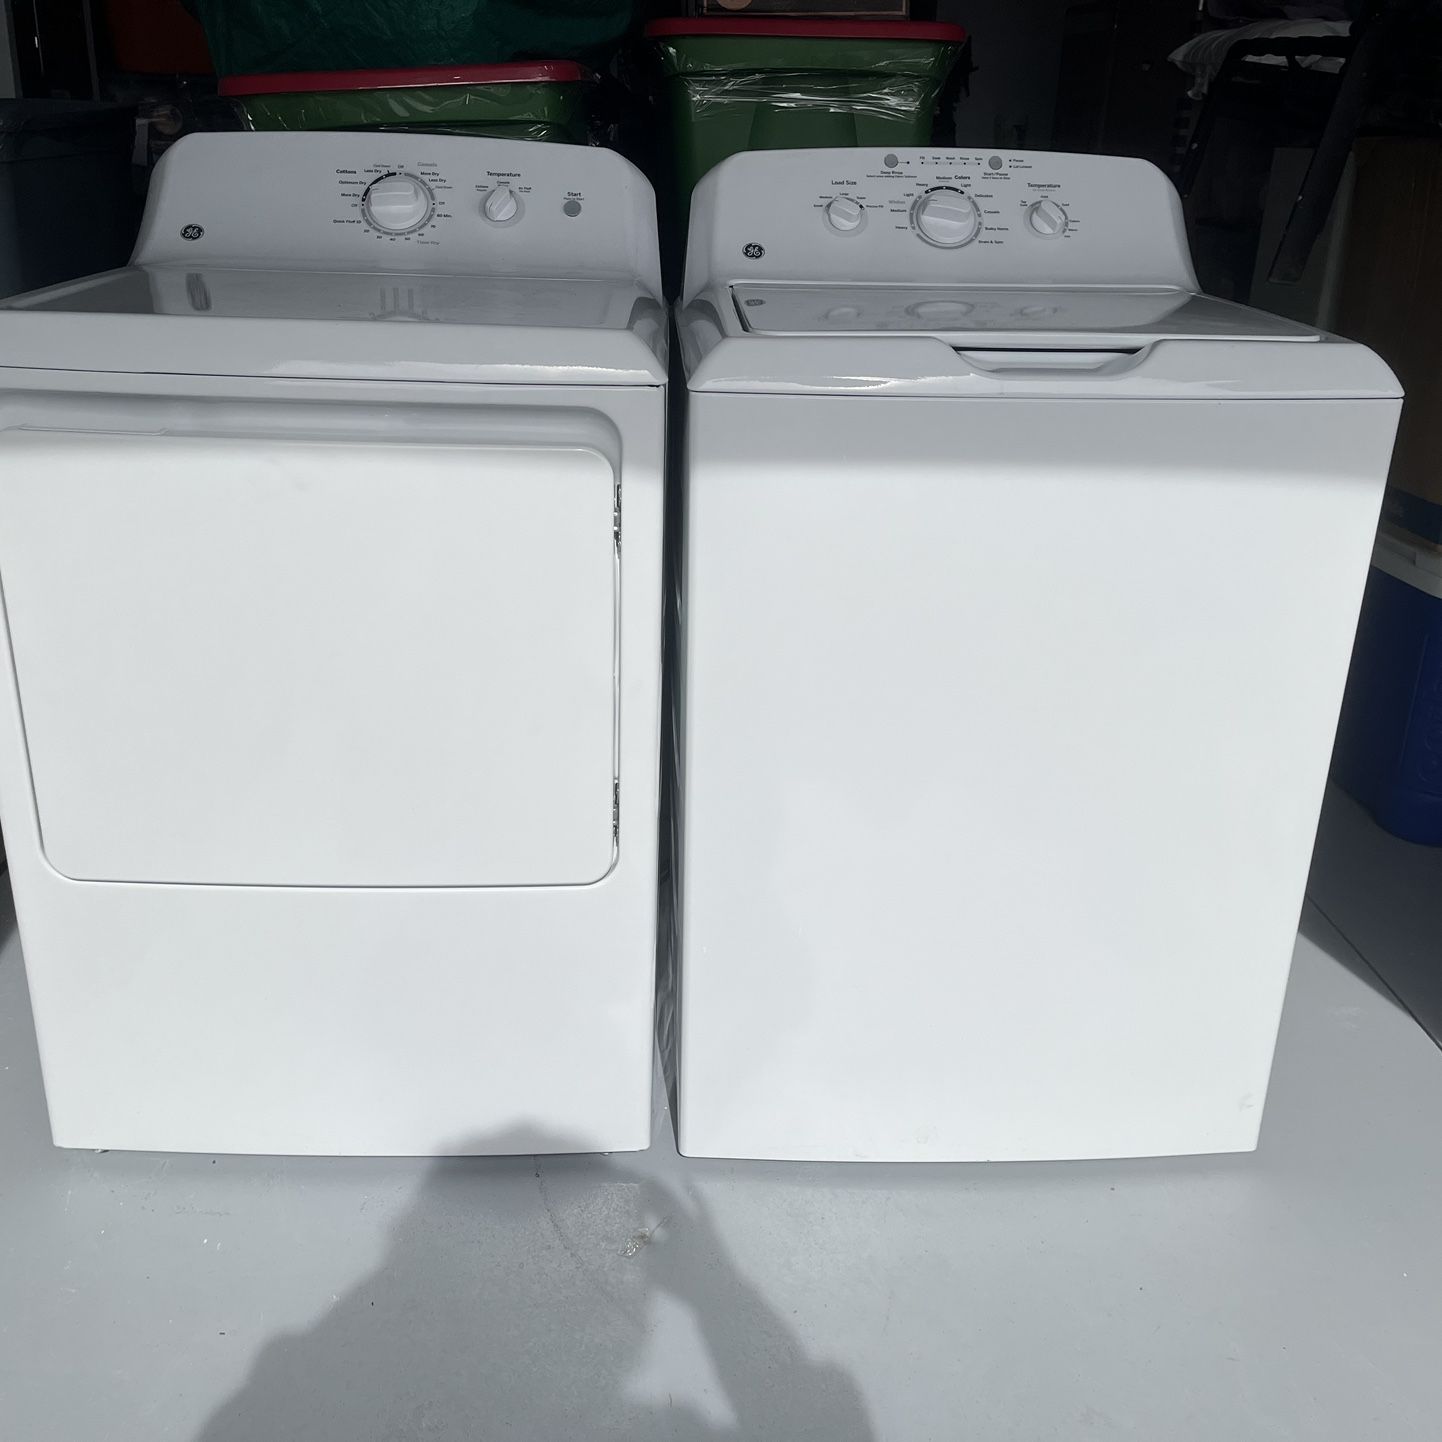 Brand new GE washer and gas dryer